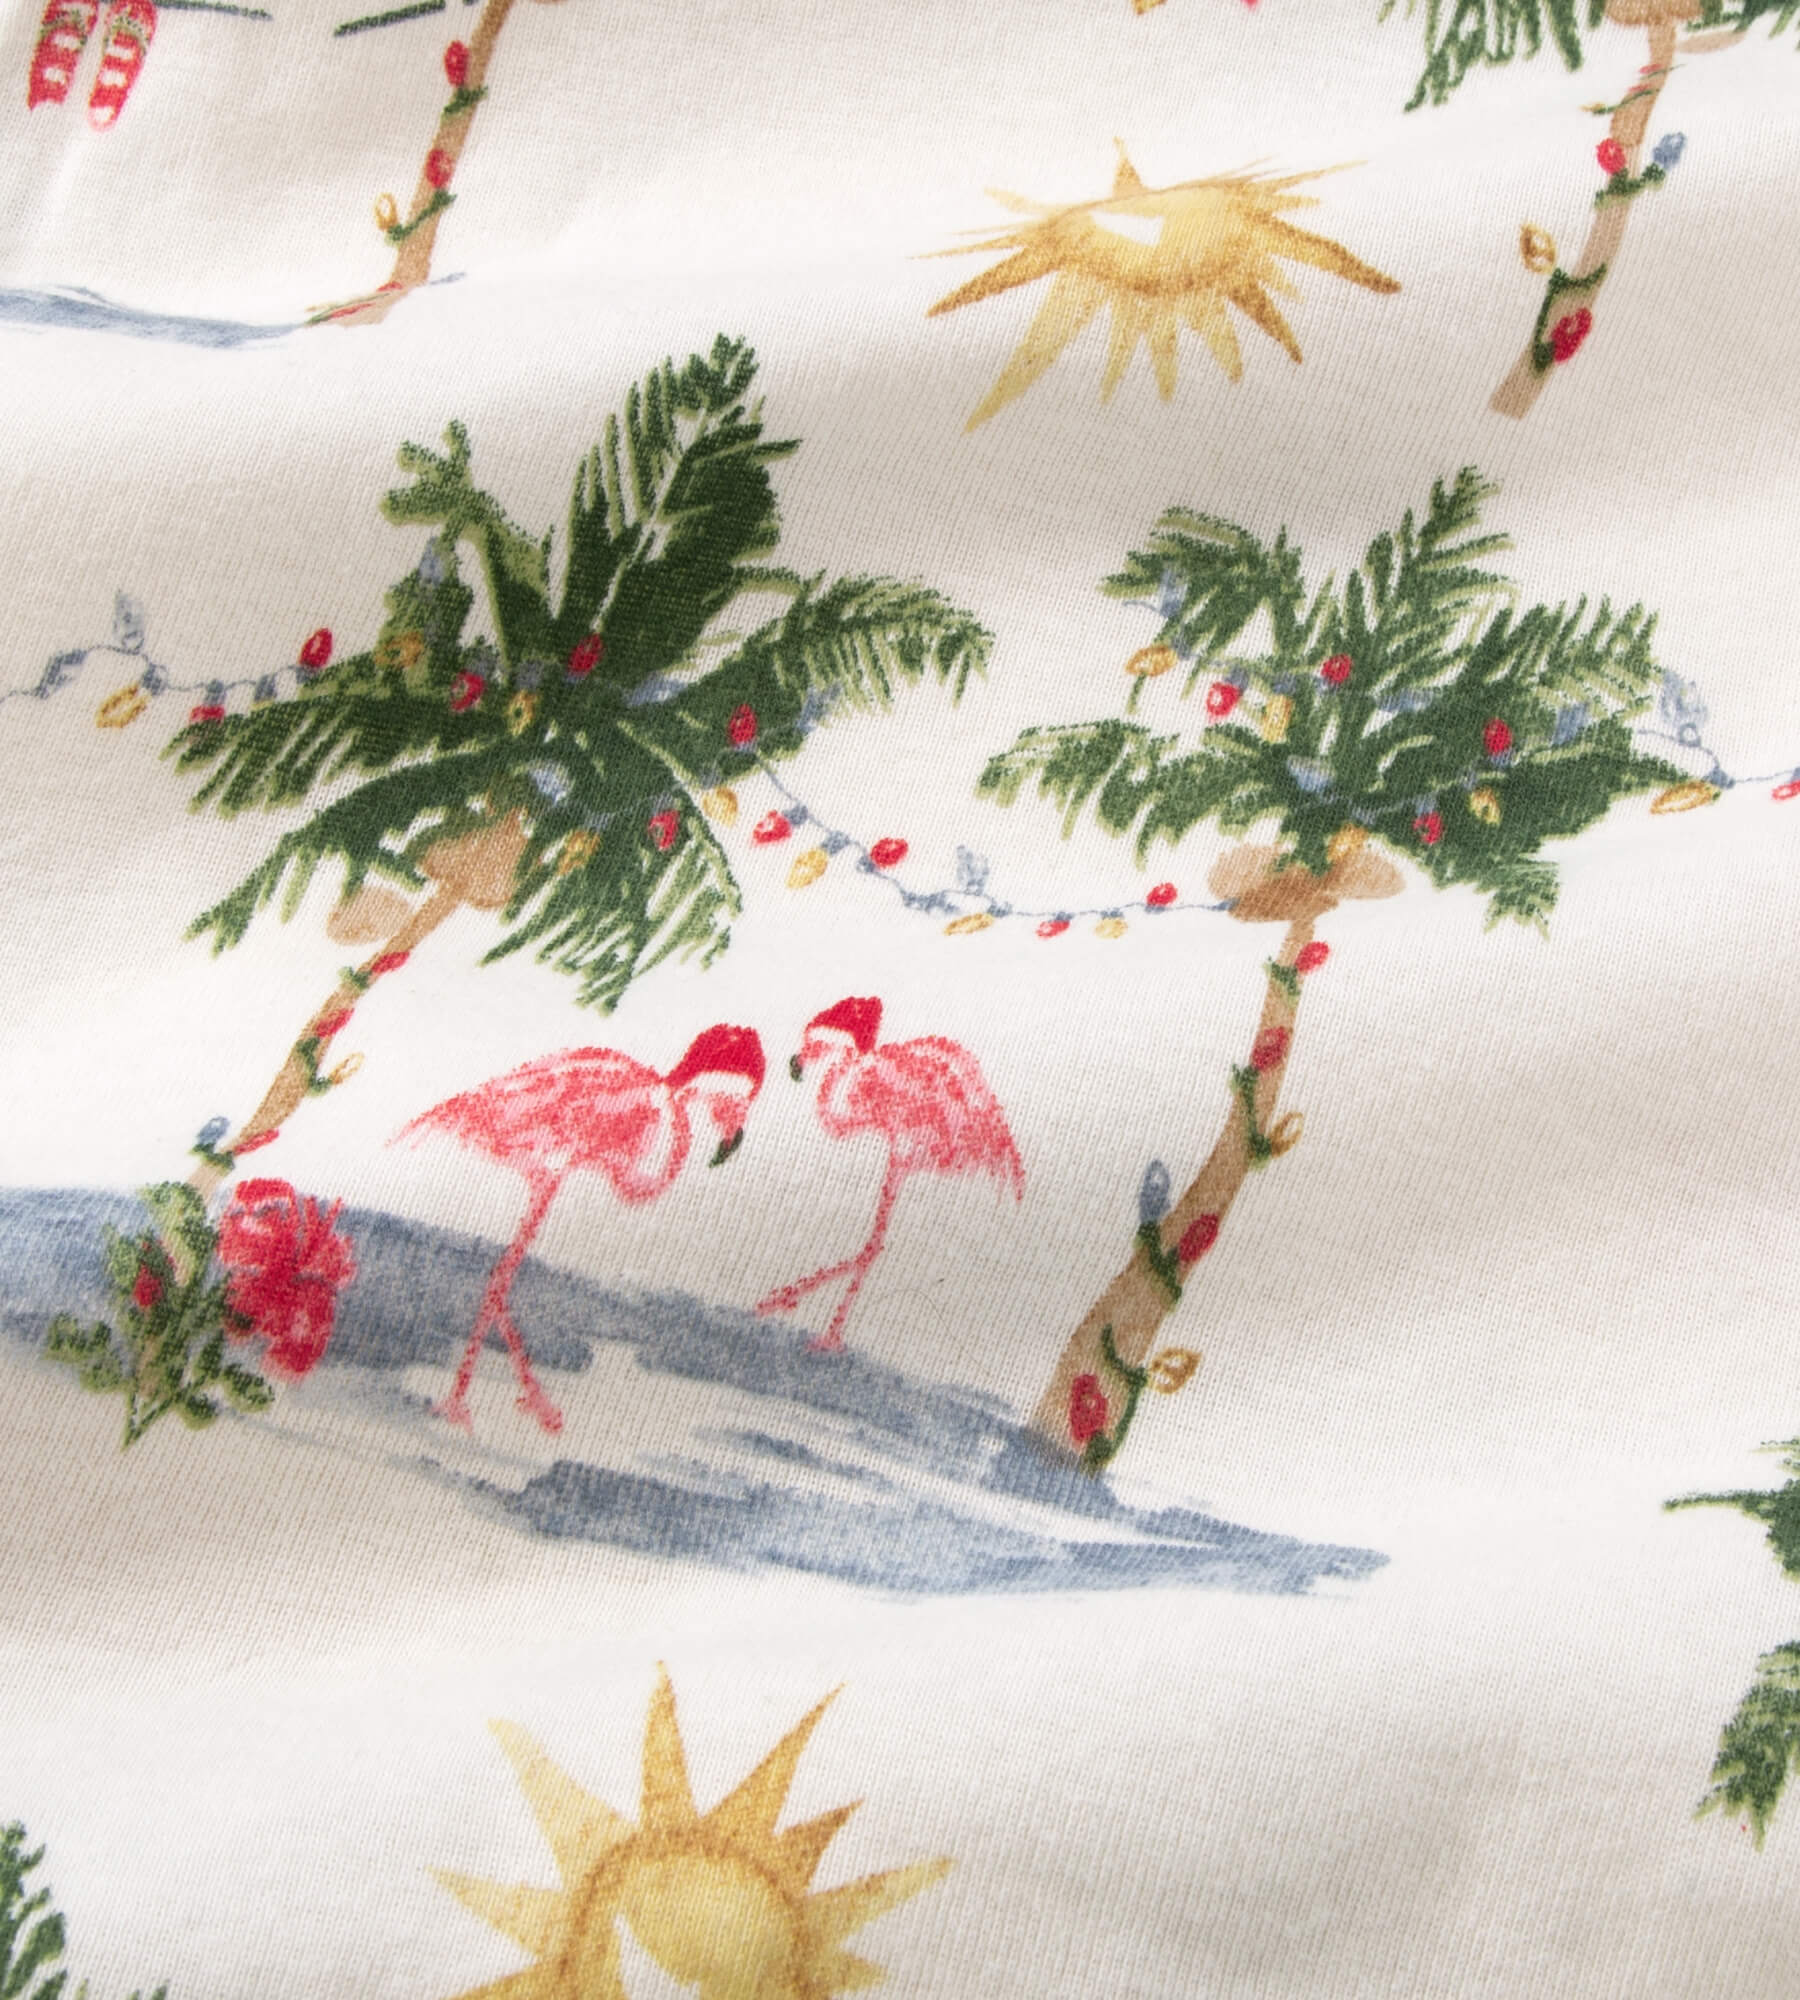 Head south and enjoy a holiday in the sun with these fun pajamas!